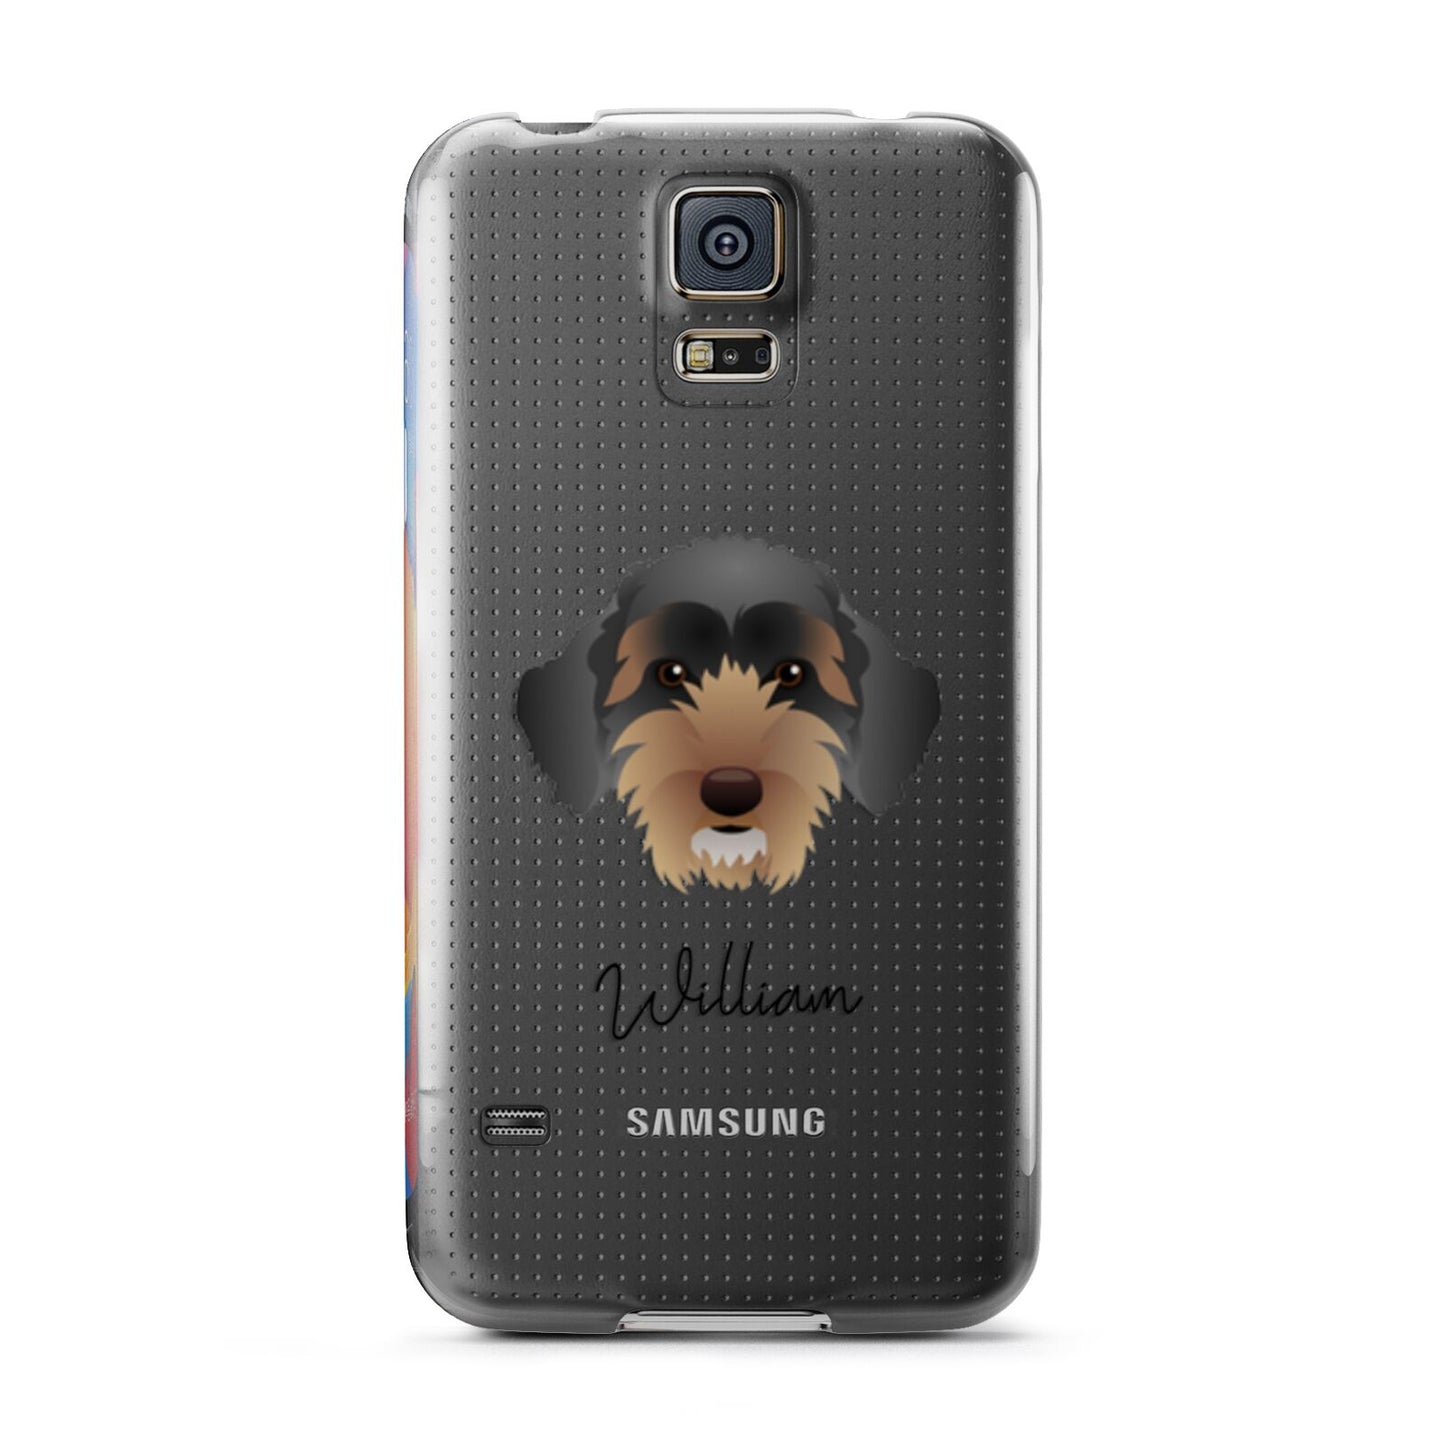 Sproodle Personalised Samsung Galaxy S5 Case